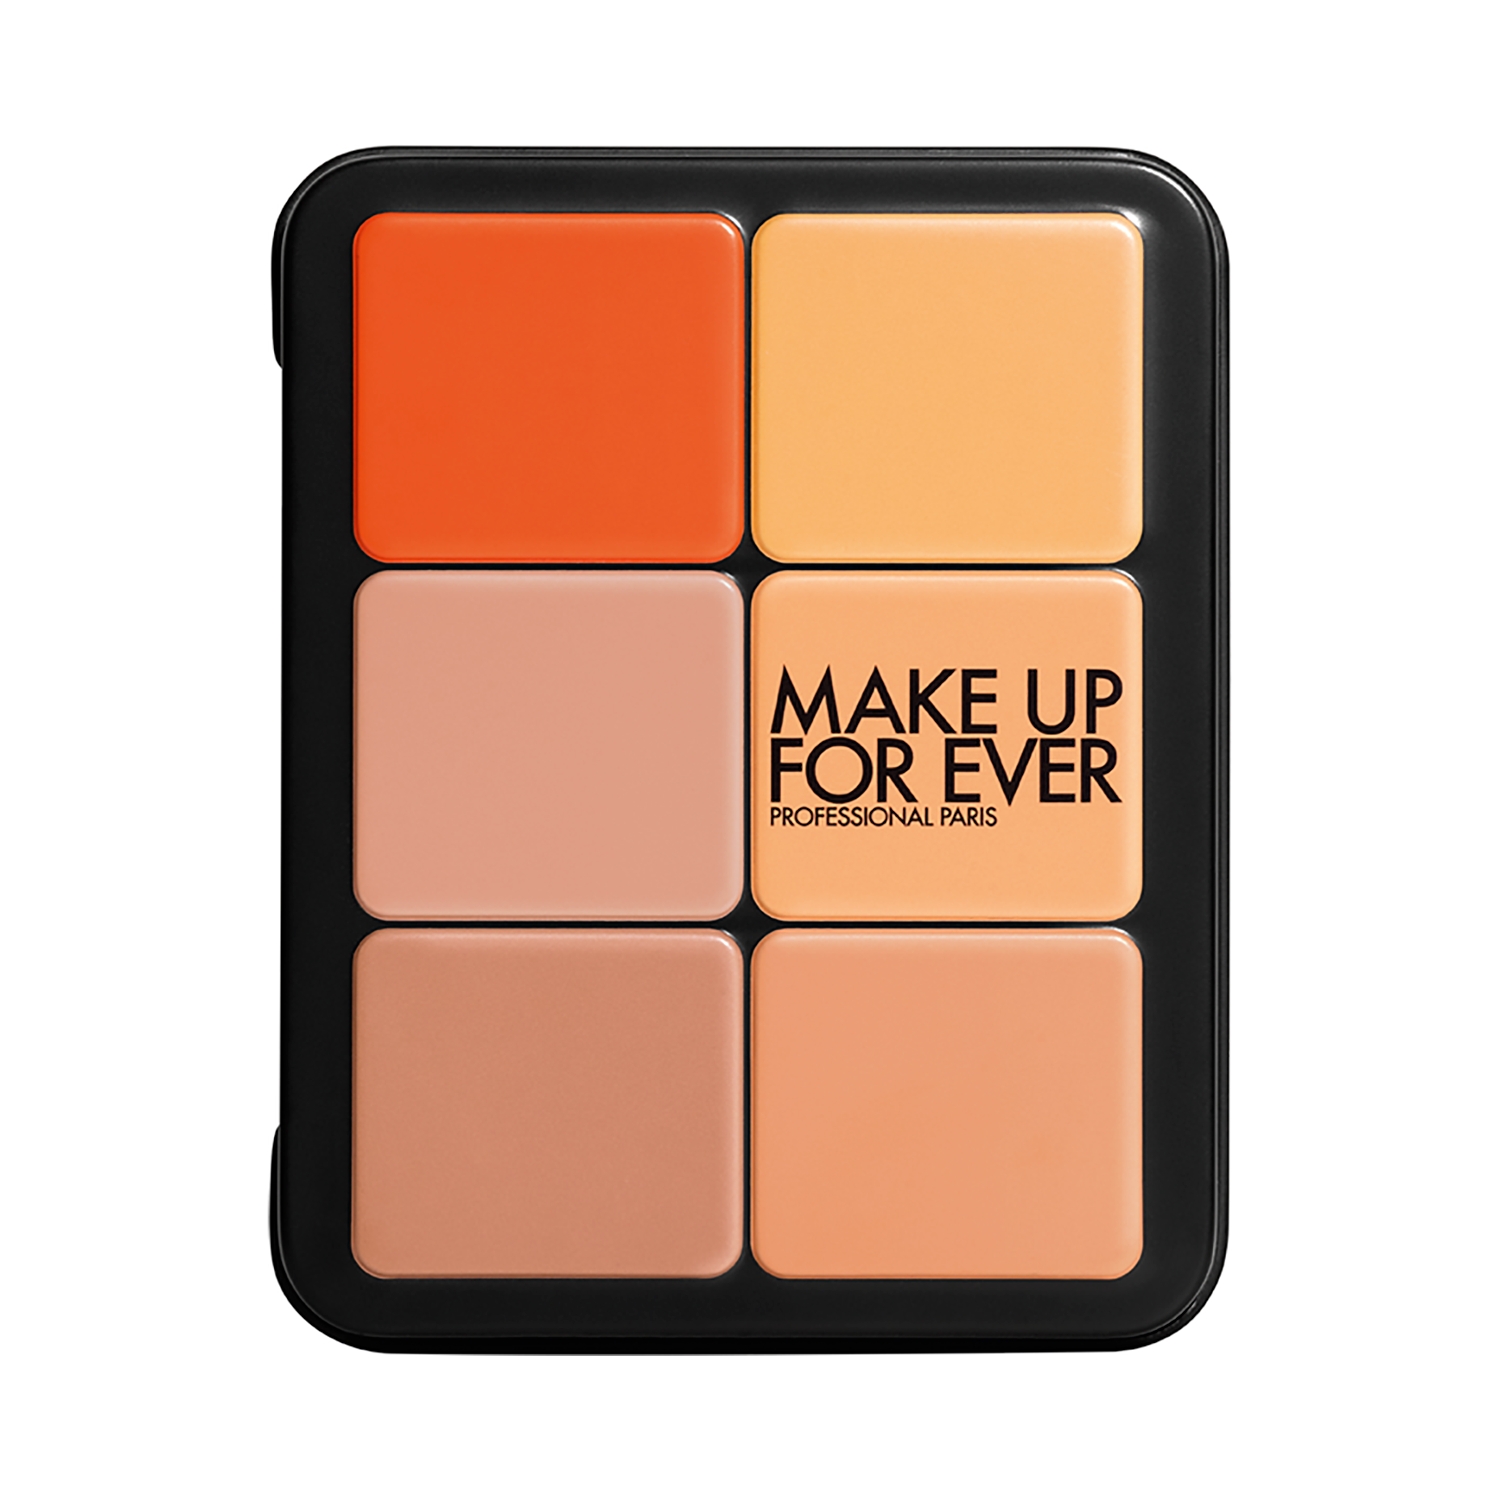 Make Up For Ever | Make Up For Ever HD Skin All-In-One Face Palette - 2 Harmony (26.5g)